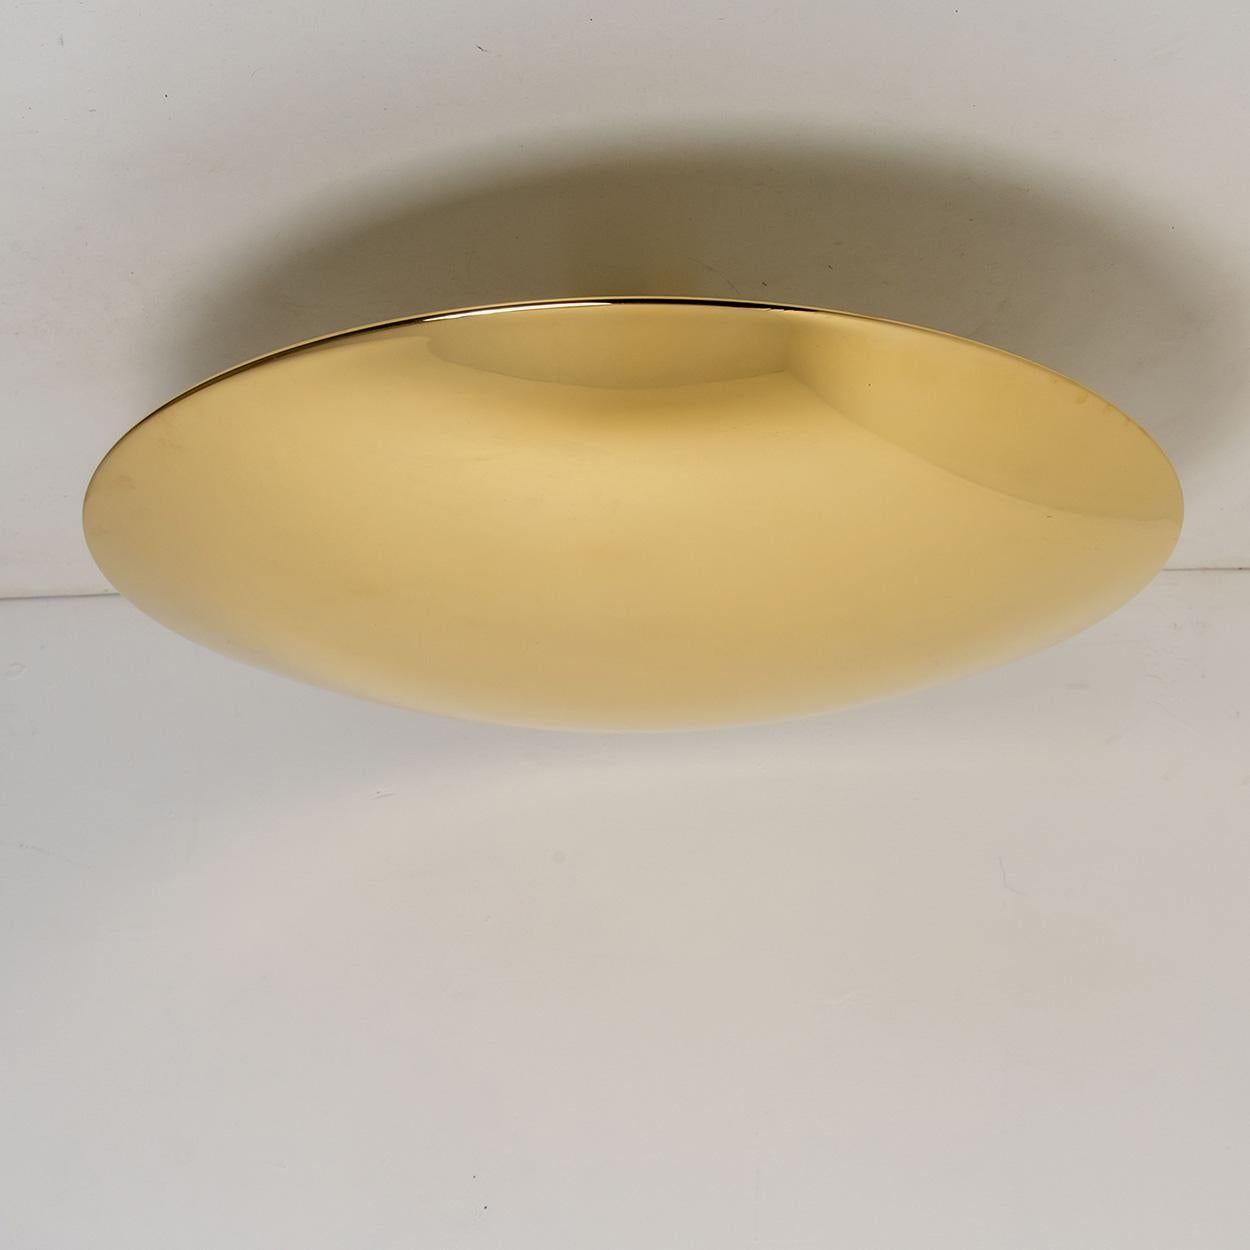 1 of the 2 Large Florian Schulz Brass Flushmount Ceiling /Wall Lights, 1970 For Sale 5